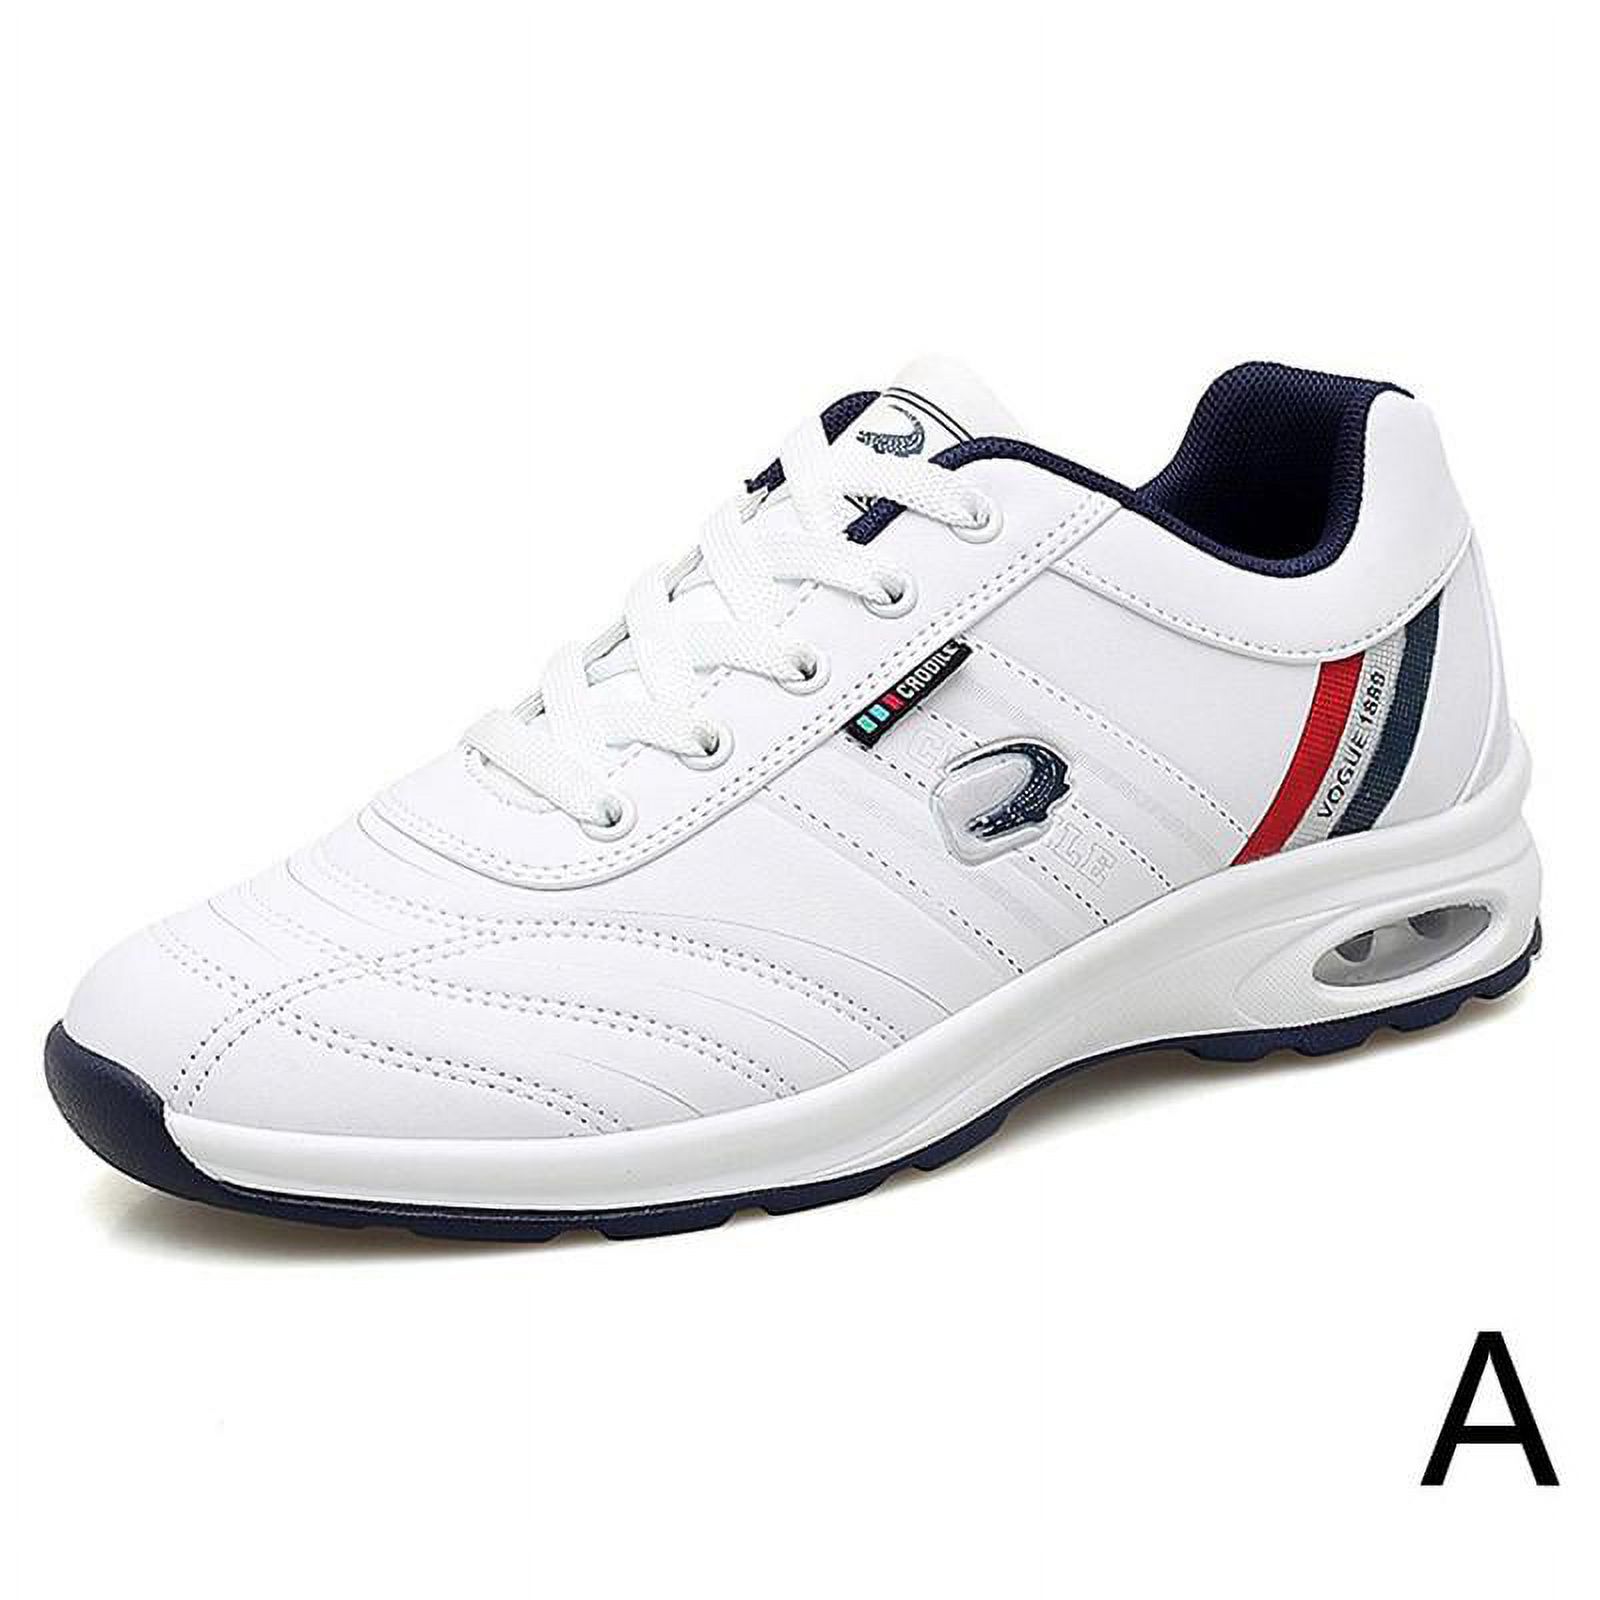 New Men's Golf Shoes Lightweight Men Shoes Golf Waterproof Anti-slip Shoes Golf Shoes Breathable Sports Shoes R3K7 - image 1 of 8